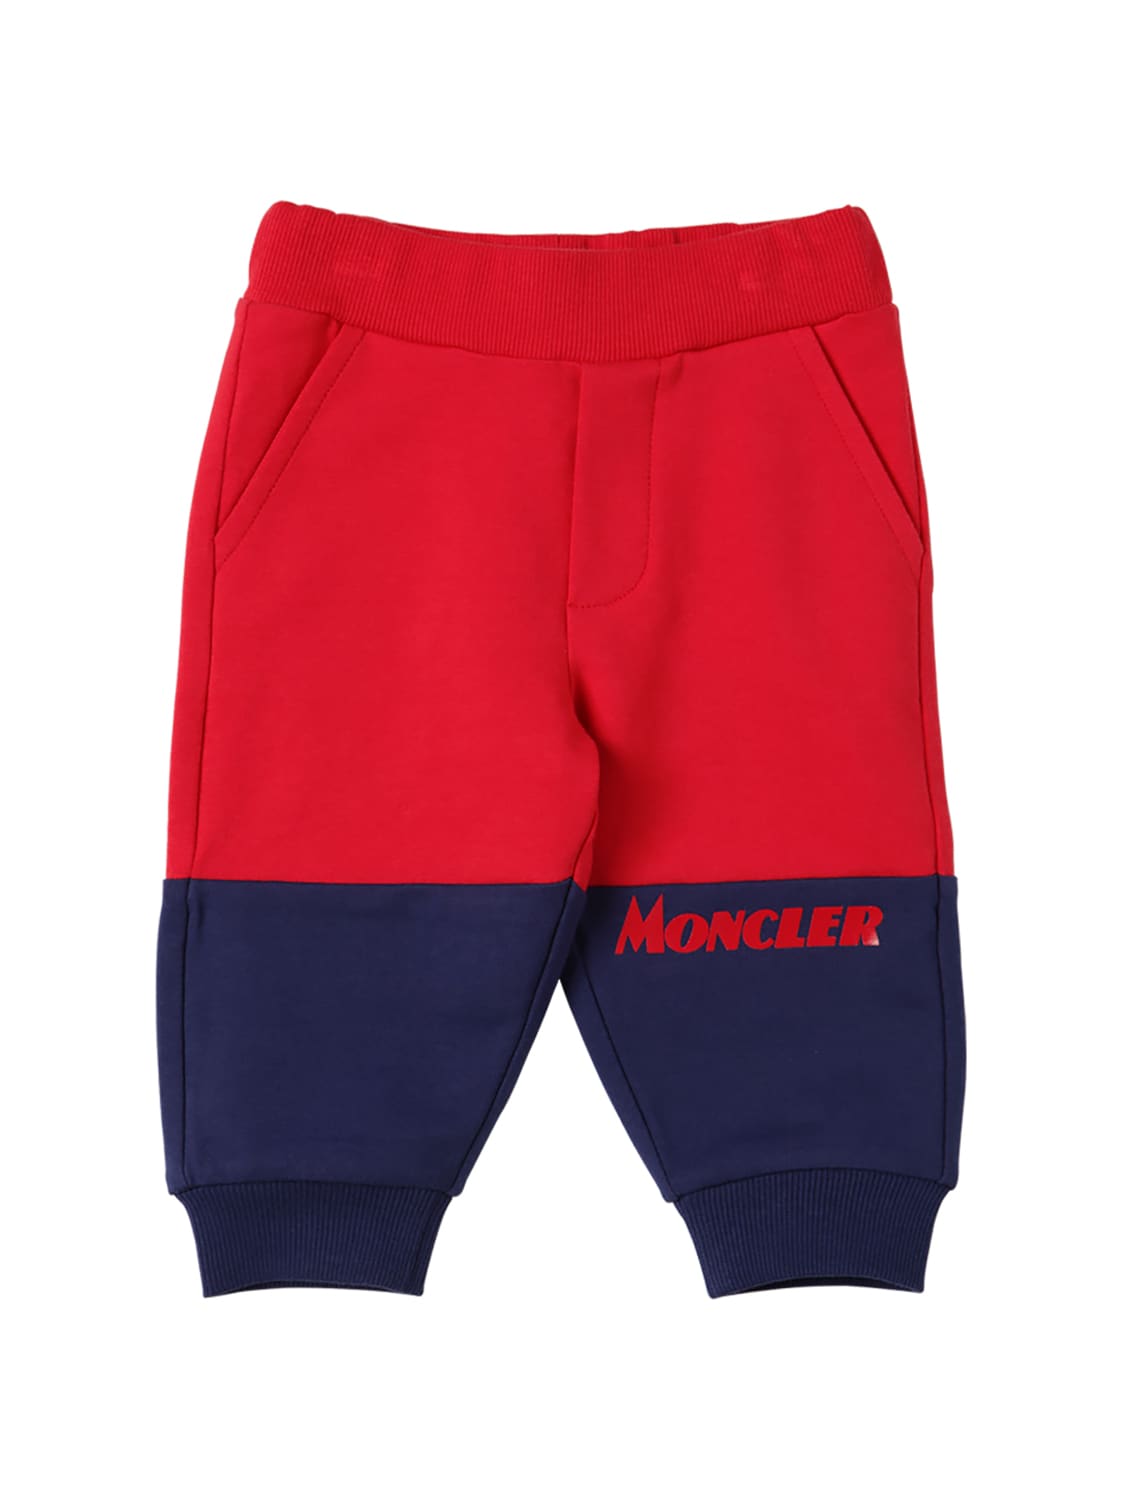 Moncler Kids' Printed Color Block Cotton Sweatpants In Red